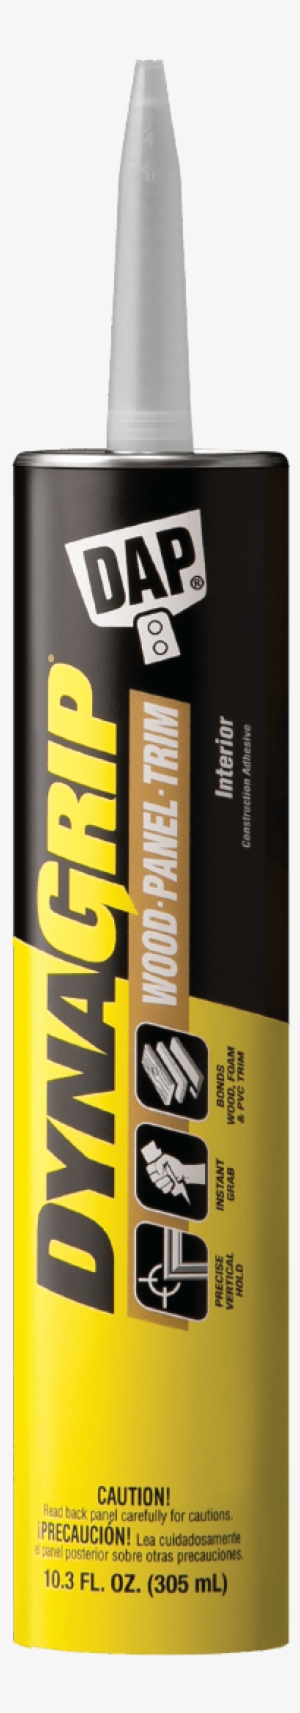 Category Project Specific Wood Panel Trim 10 3oz - Dap 27510 Dynagrip Heavy Duty Construction Adhesive,